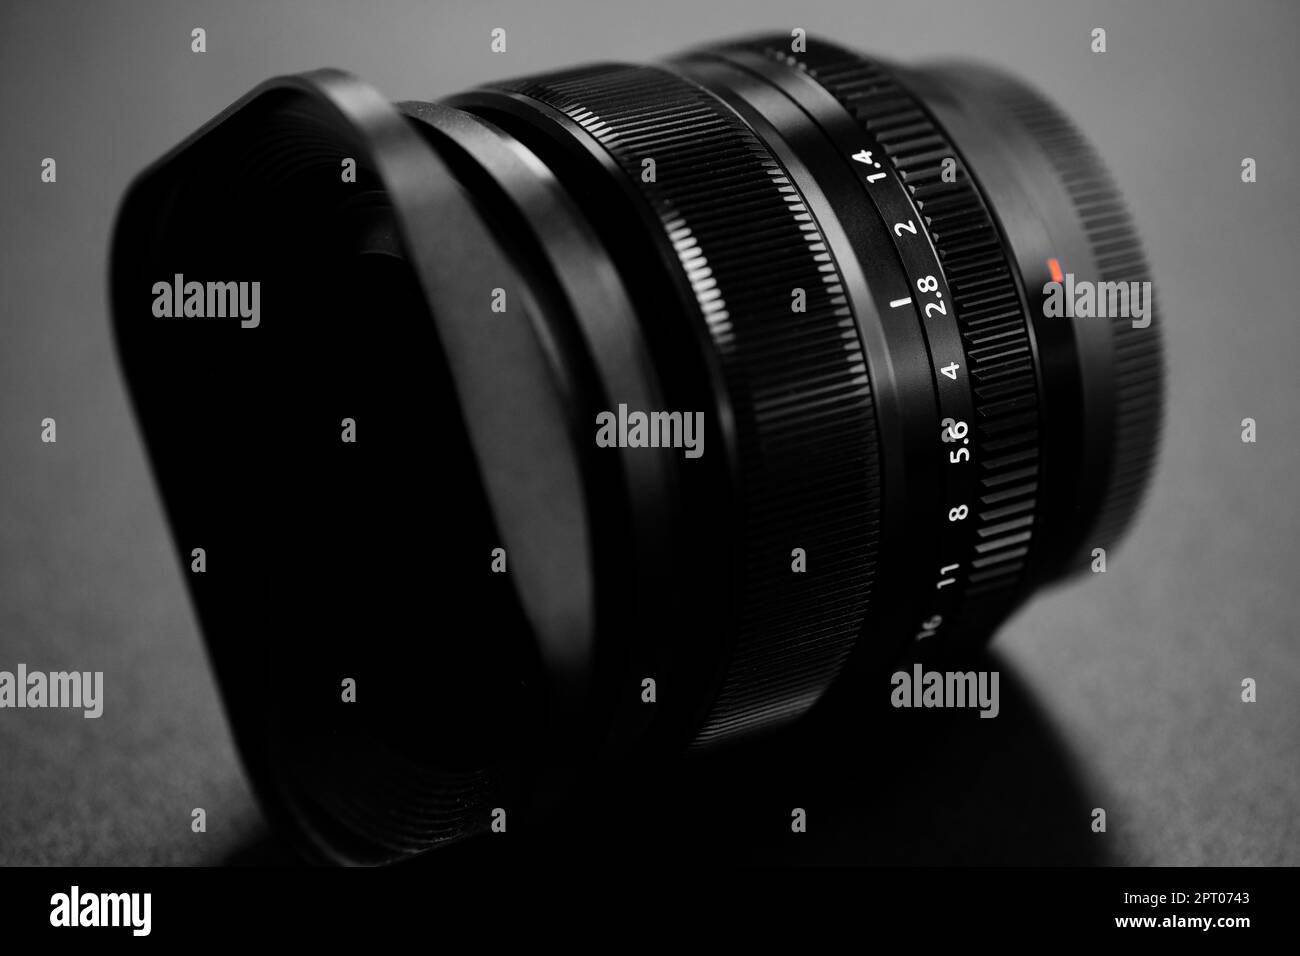 Camera lens details of aperture or f-stop value fstop values of 2.8 f/2.8 Stock Photo